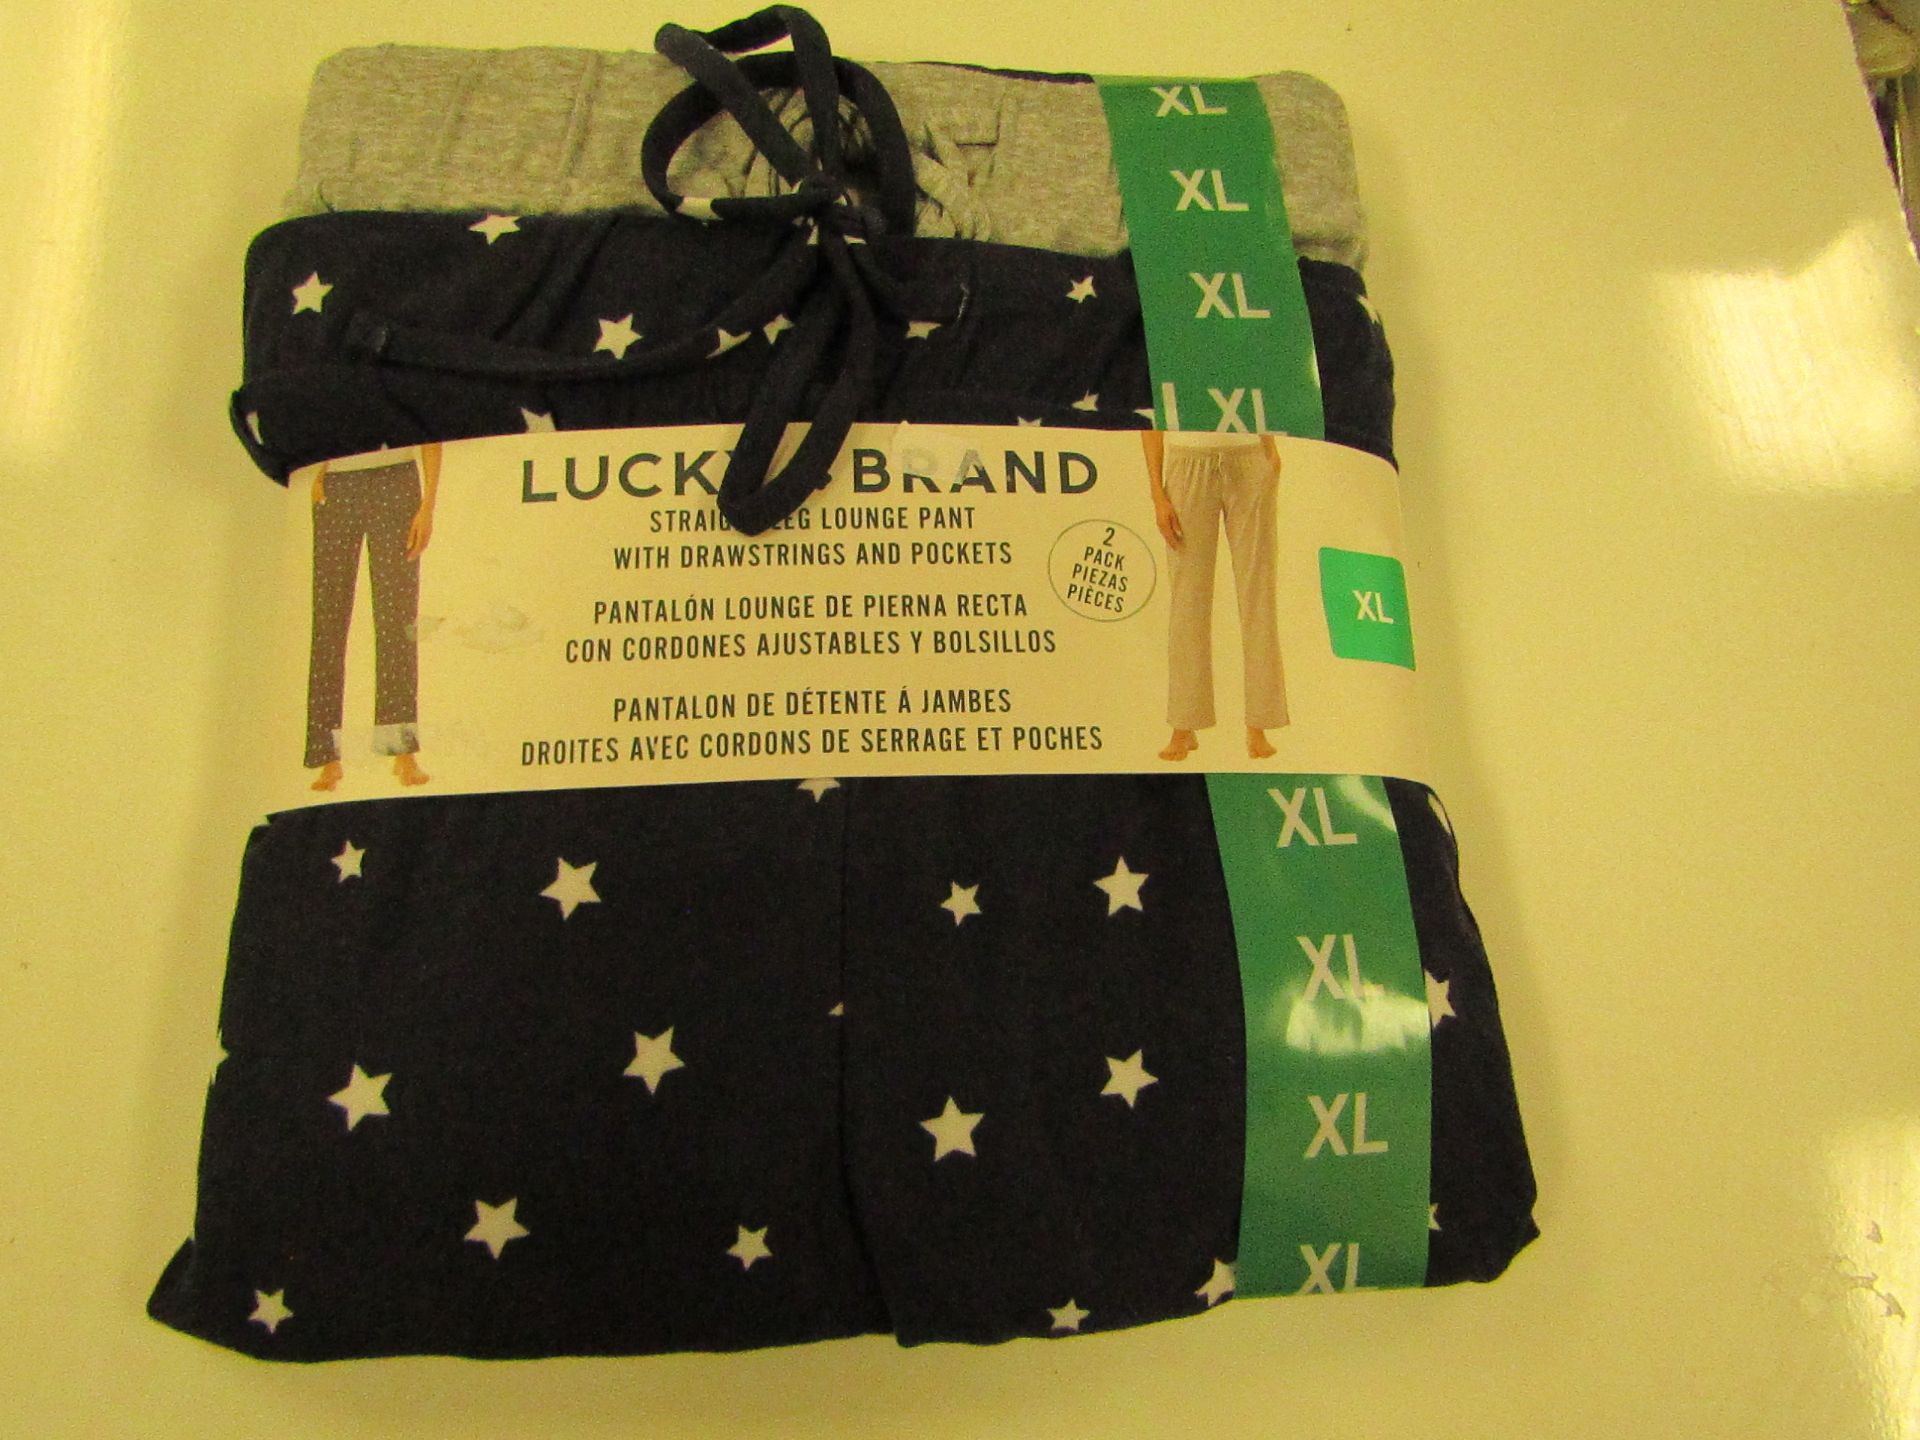 Lucky Brand Straight Leg Lounge Set With Pockets Size X/L New & Packaged